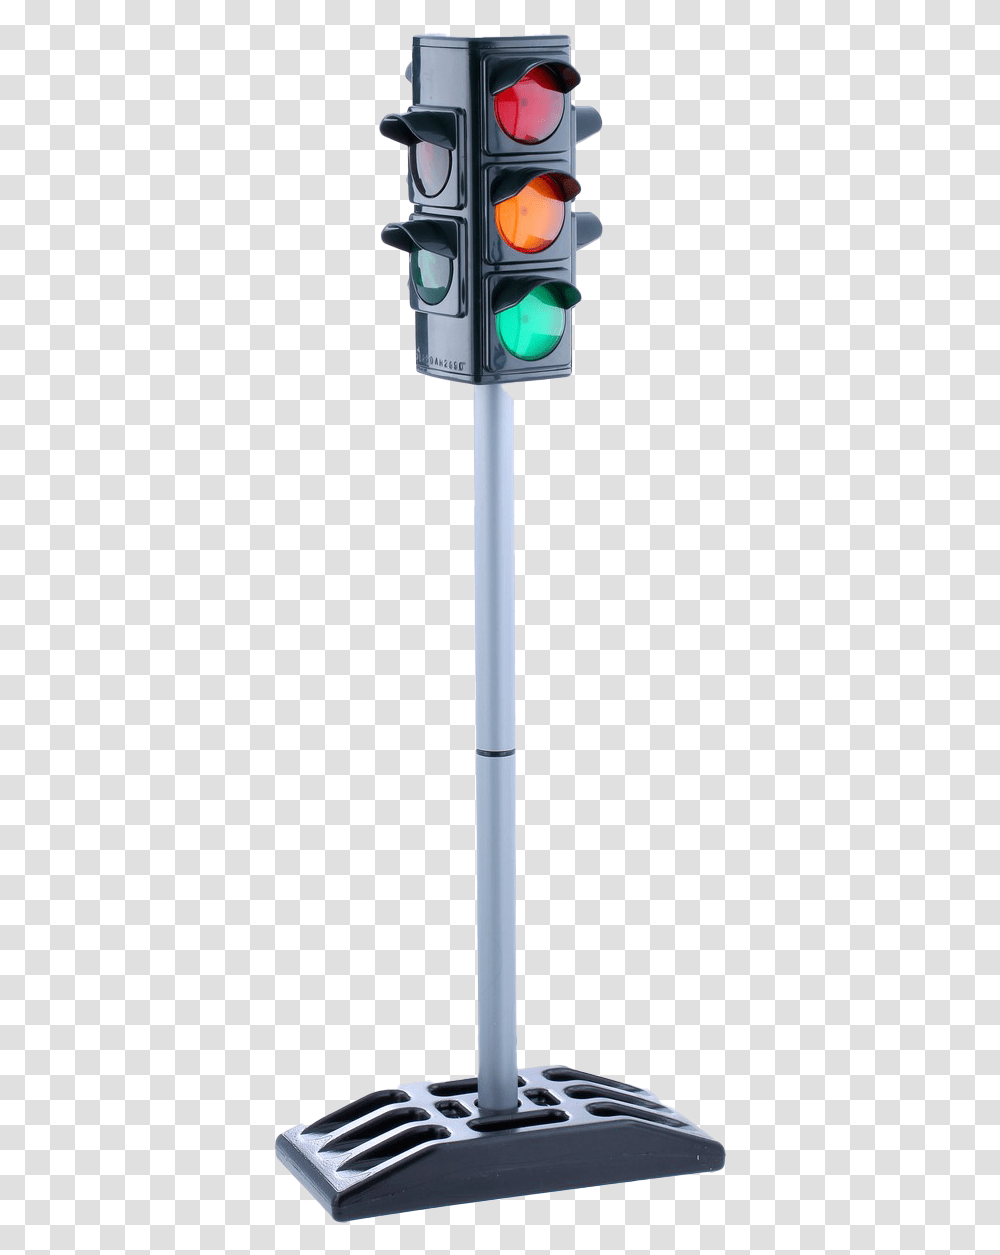 Traffic Light Image Traffic Light, Lamp Post, Weapon, Weaponry Transparent Png